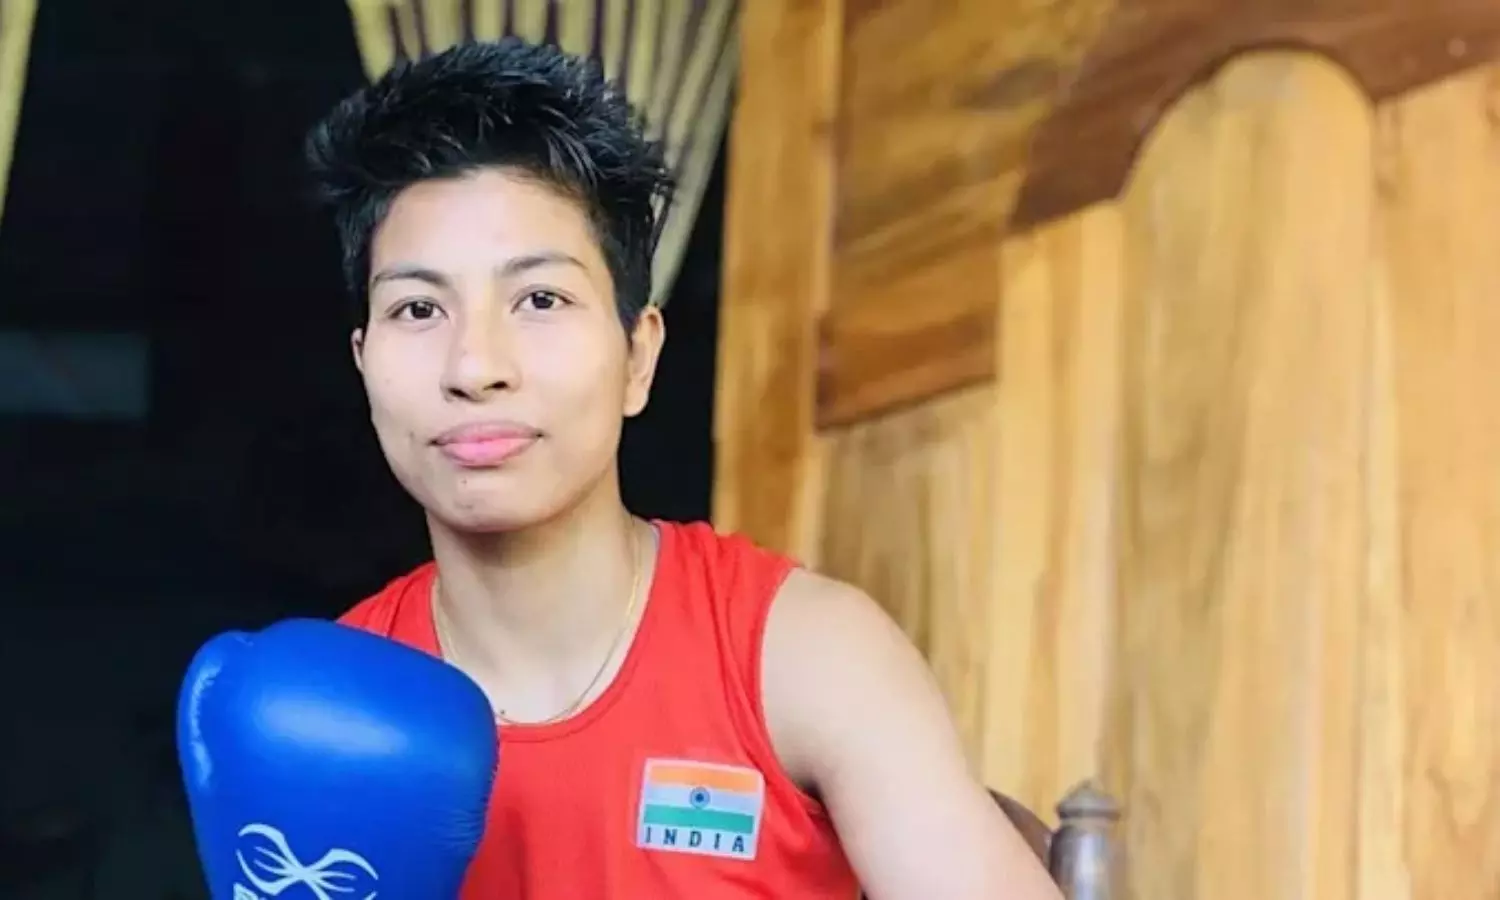 Lovlina Borgohain is the third Indian boxer to win an Olympic medal